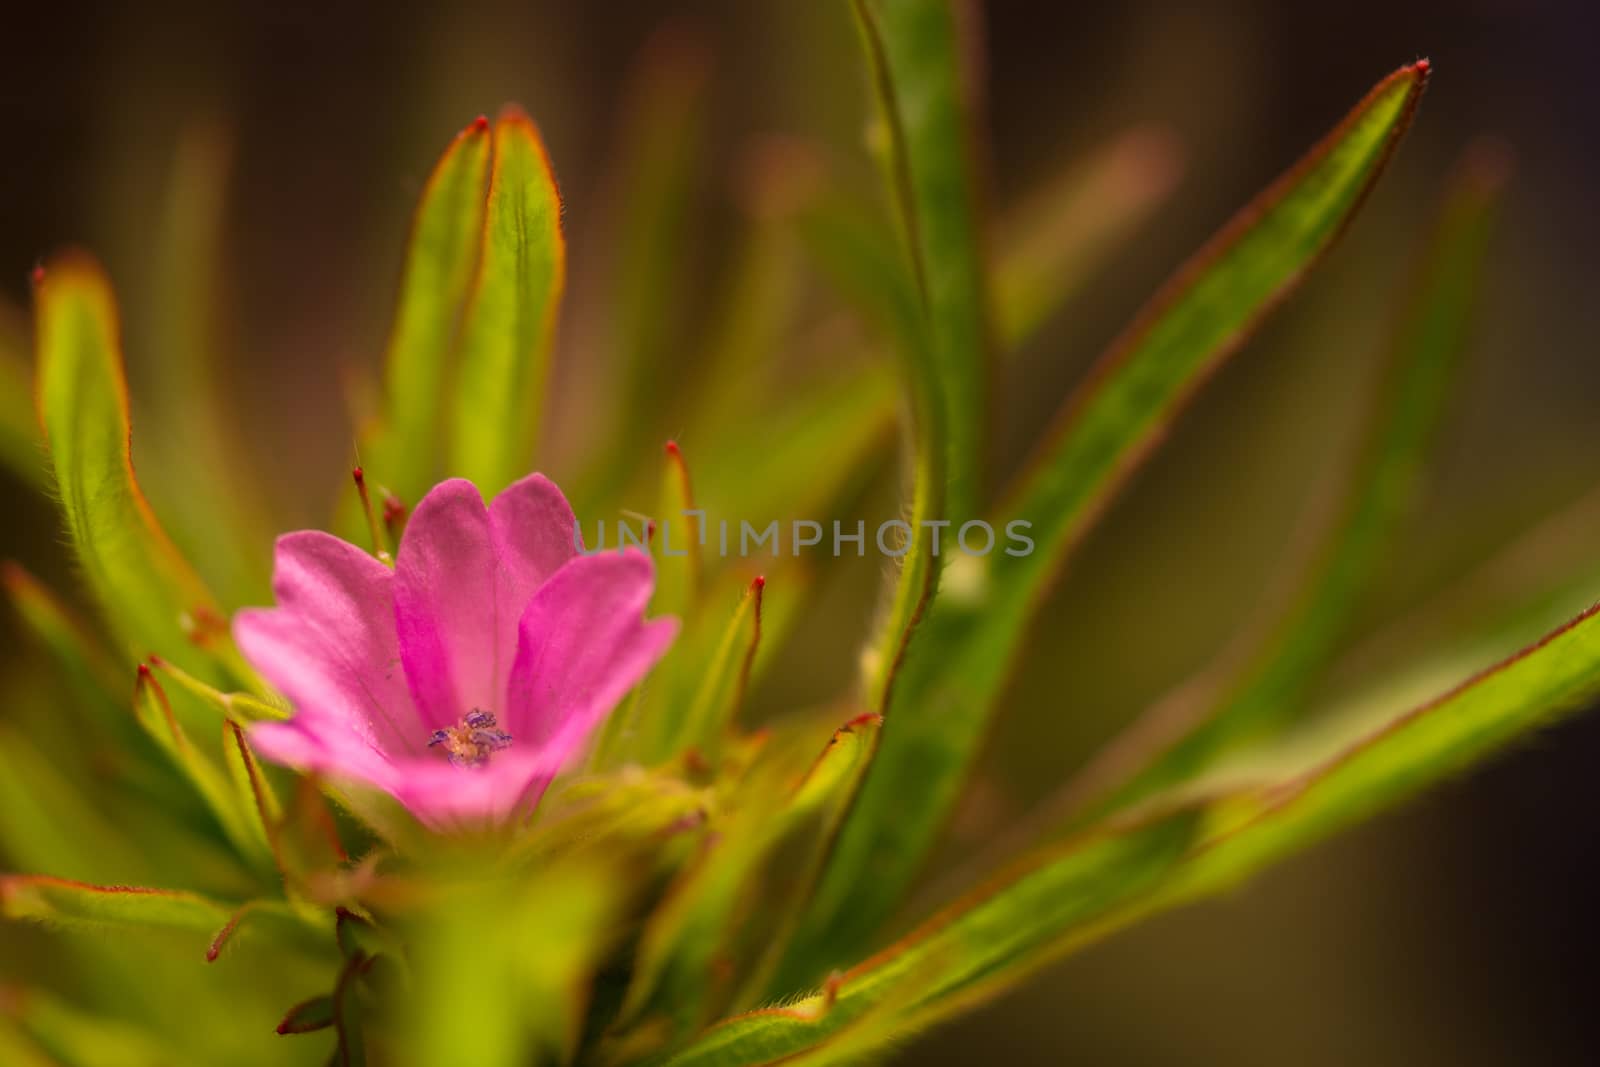 A pink flower head closeup with sharp yellow and green leaves